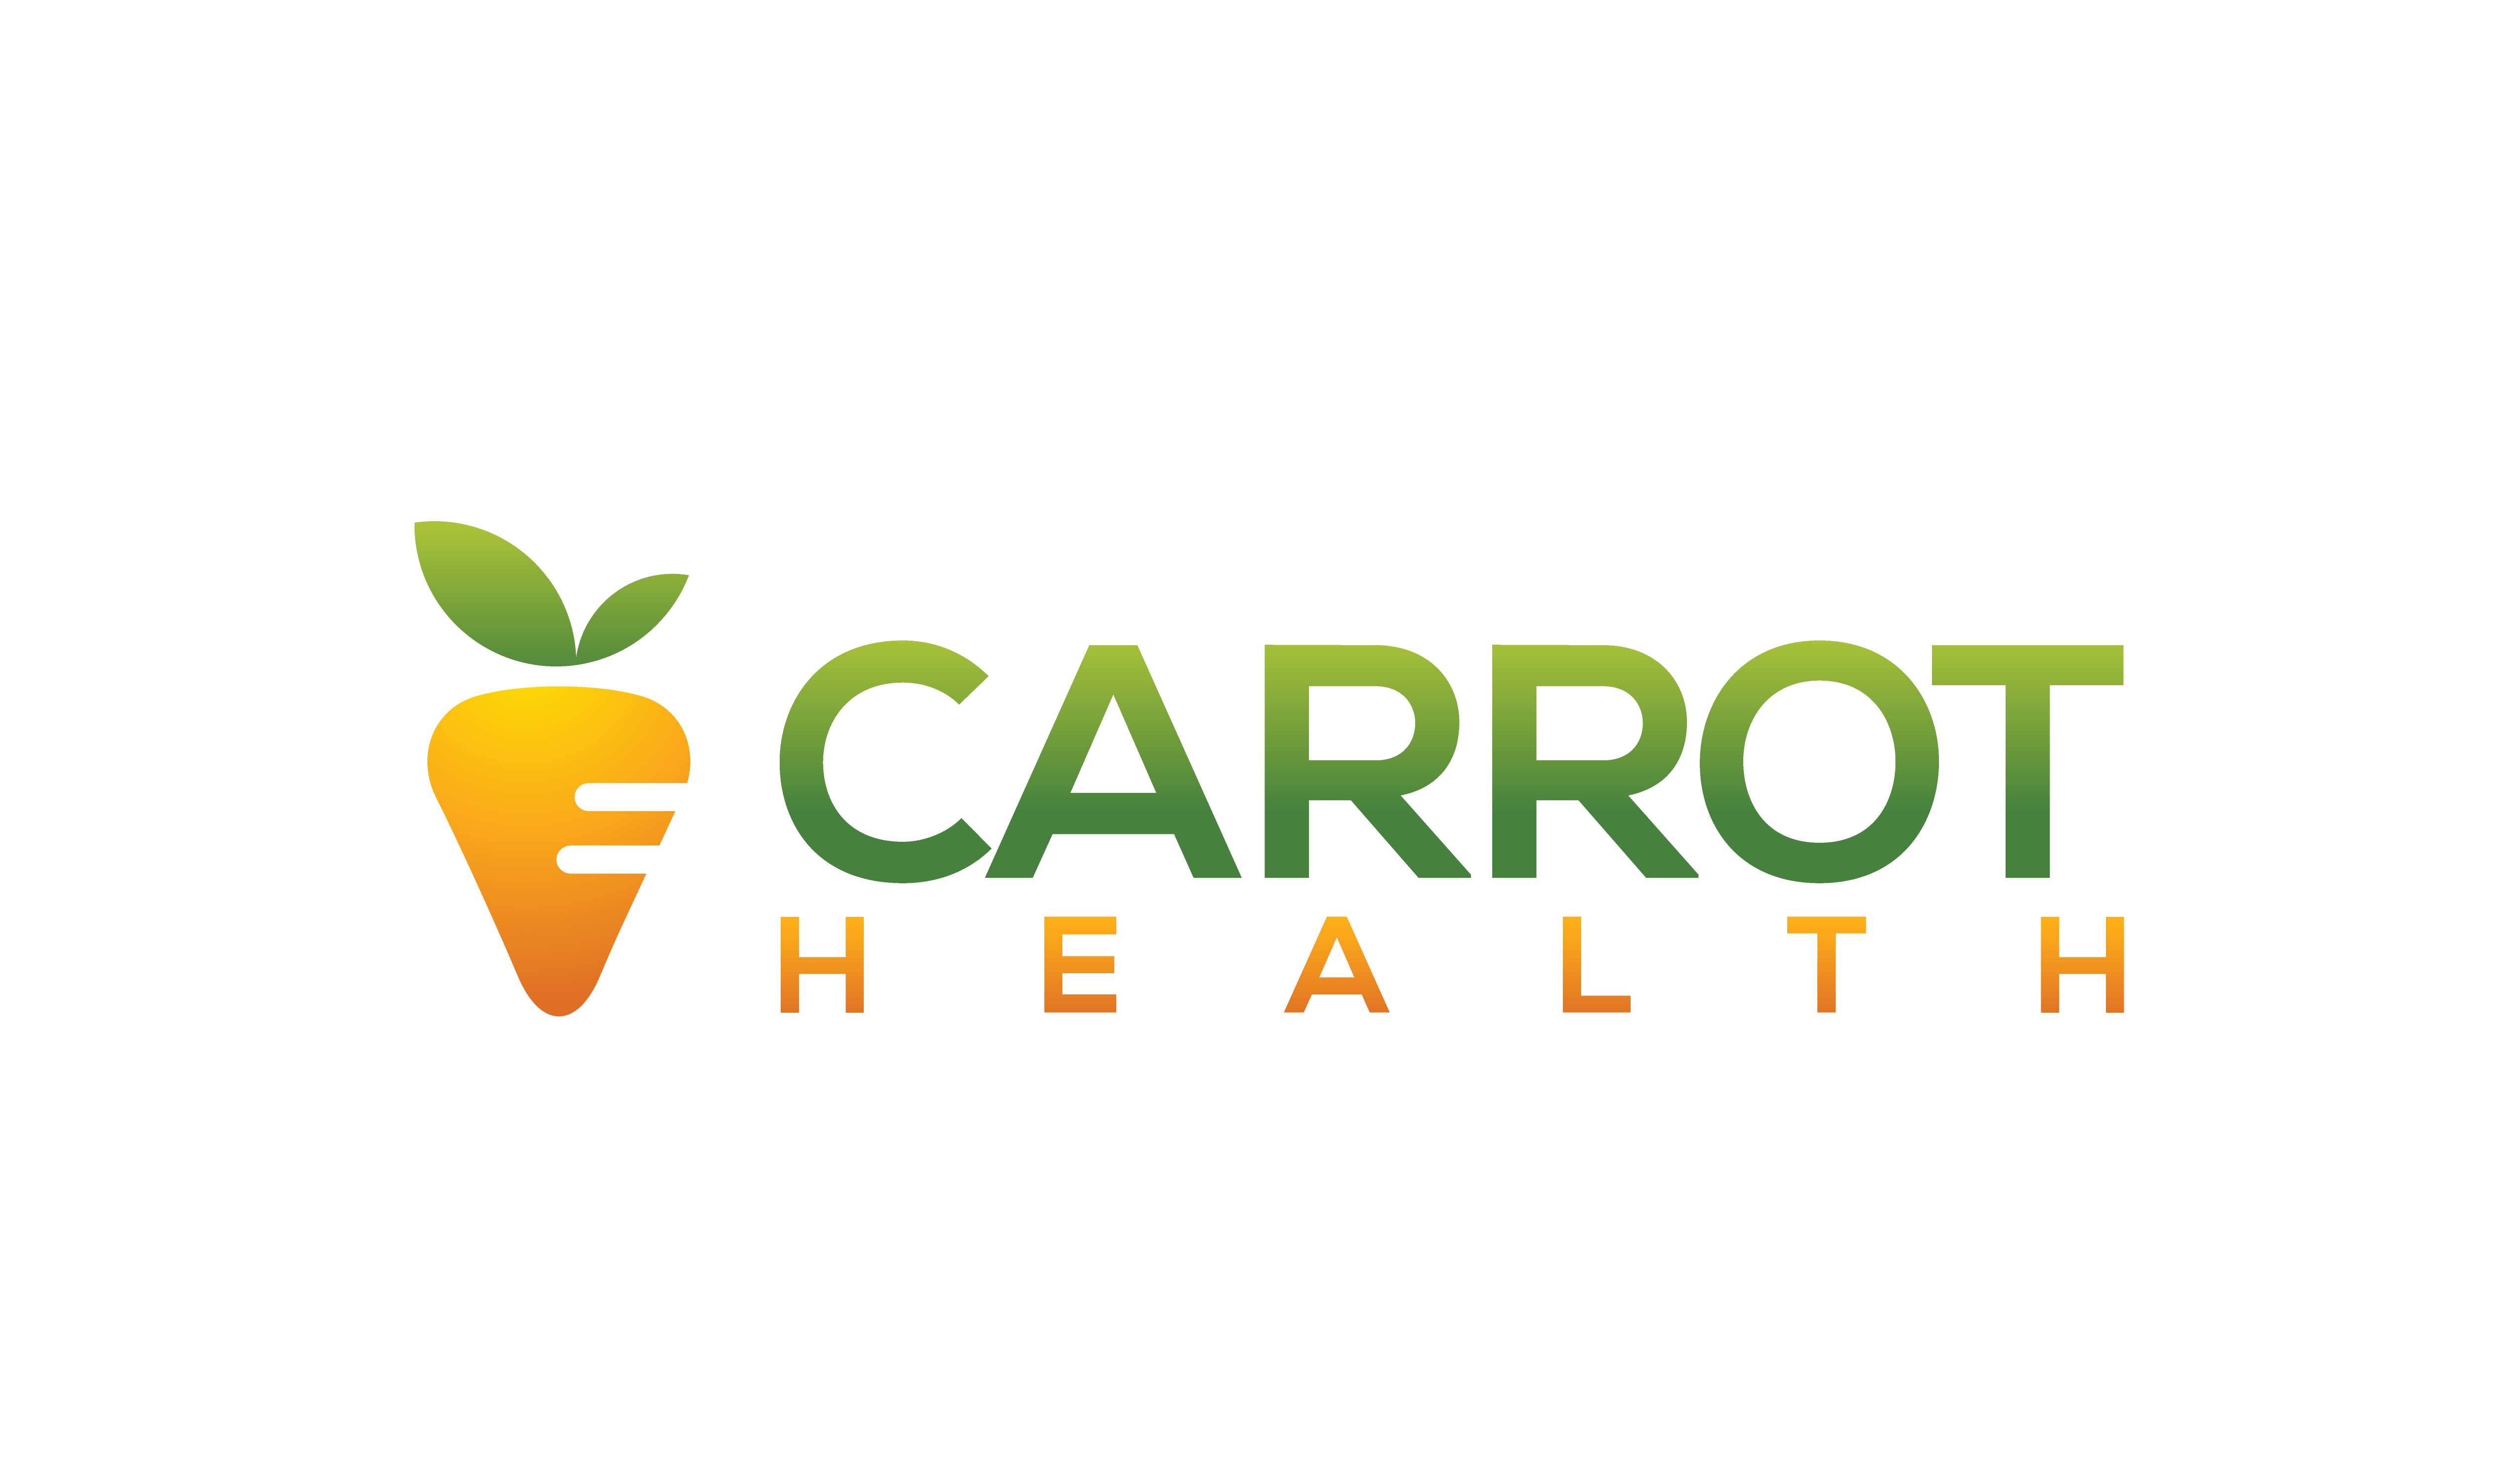 Carrot Health.png